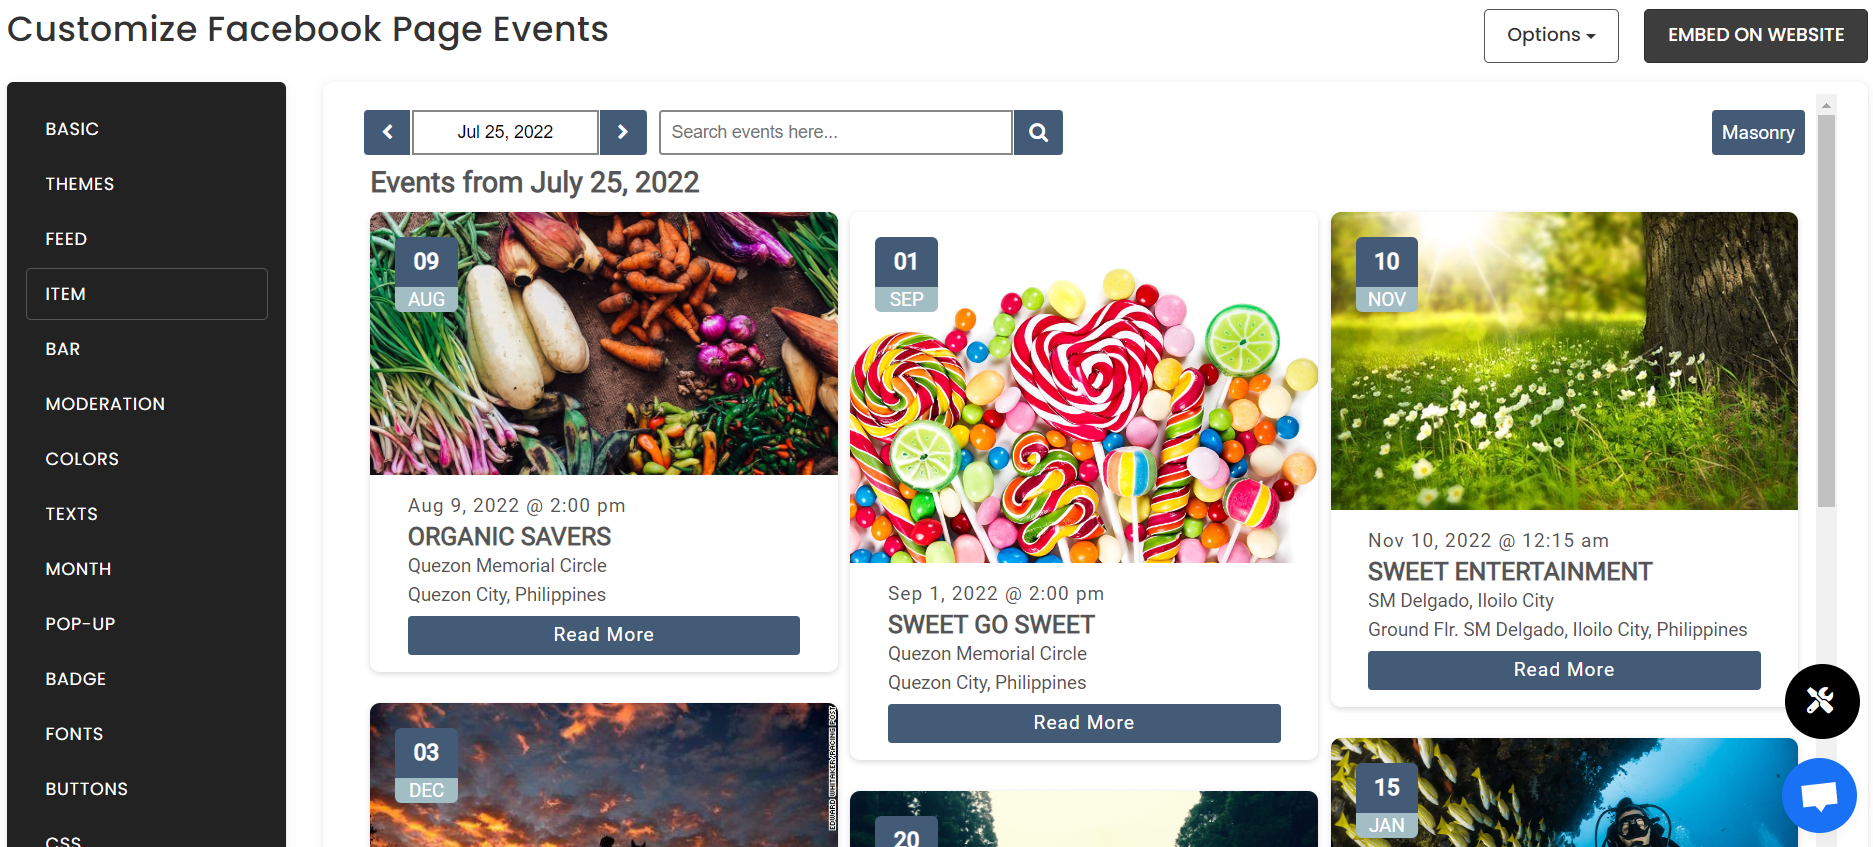 Customize your feed - How To Embed Facebook Page Events On Wordpress Website For Free?